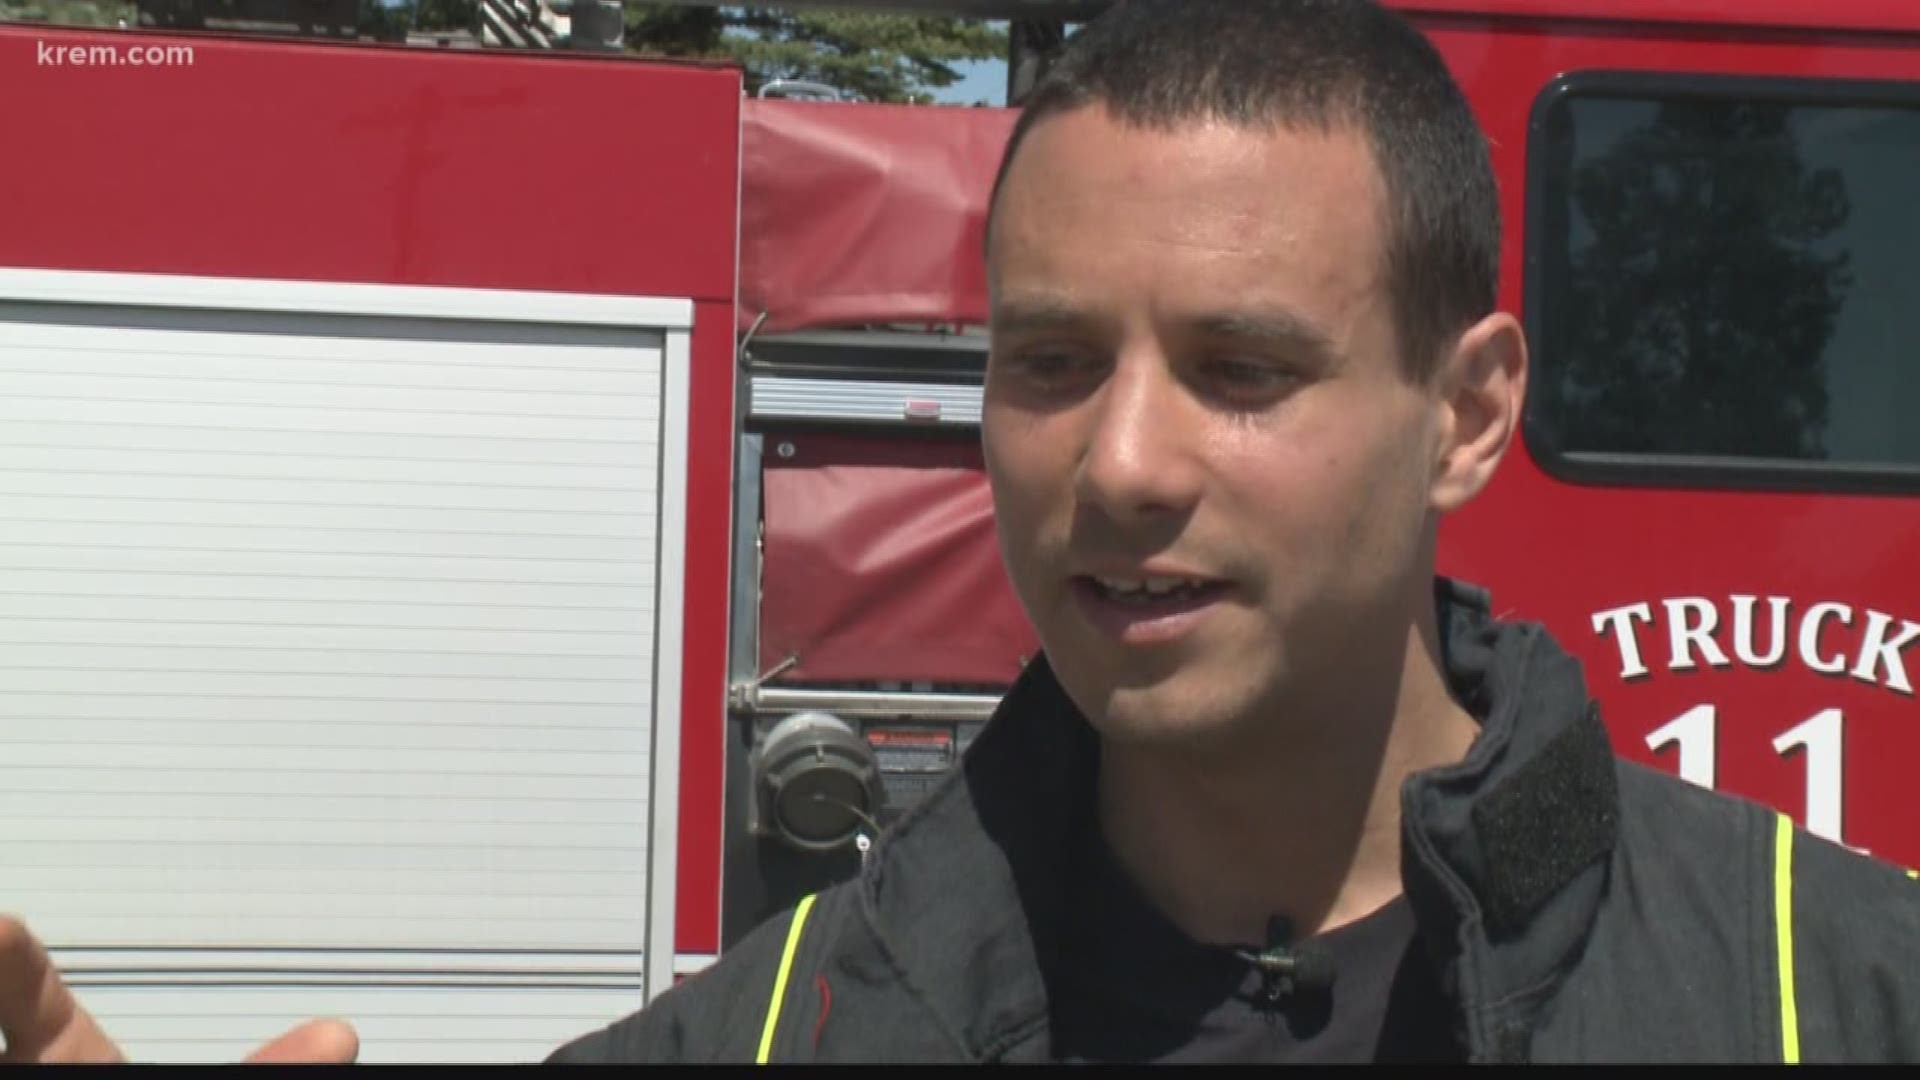 Gwen Le Tutour will try to run 100 miles in full firefighting gear. It is something that has never been done before and he is putting himself to the test to inspire others. He also hopes to break a world record.